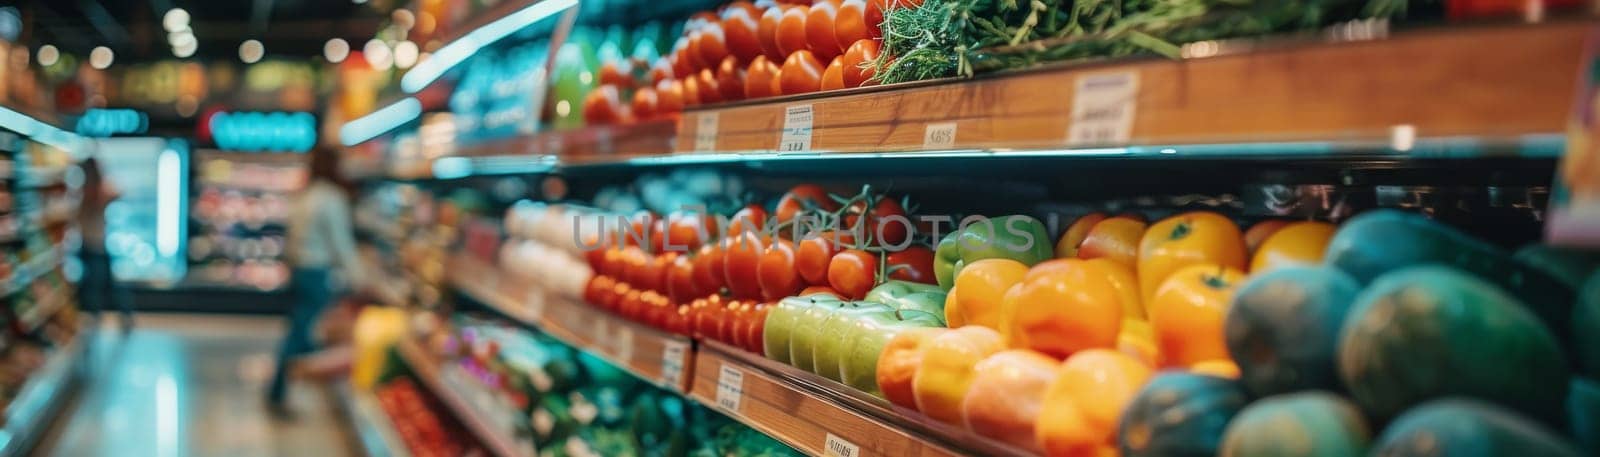 A grocery store aisle with a variety of fruits and vegetables.